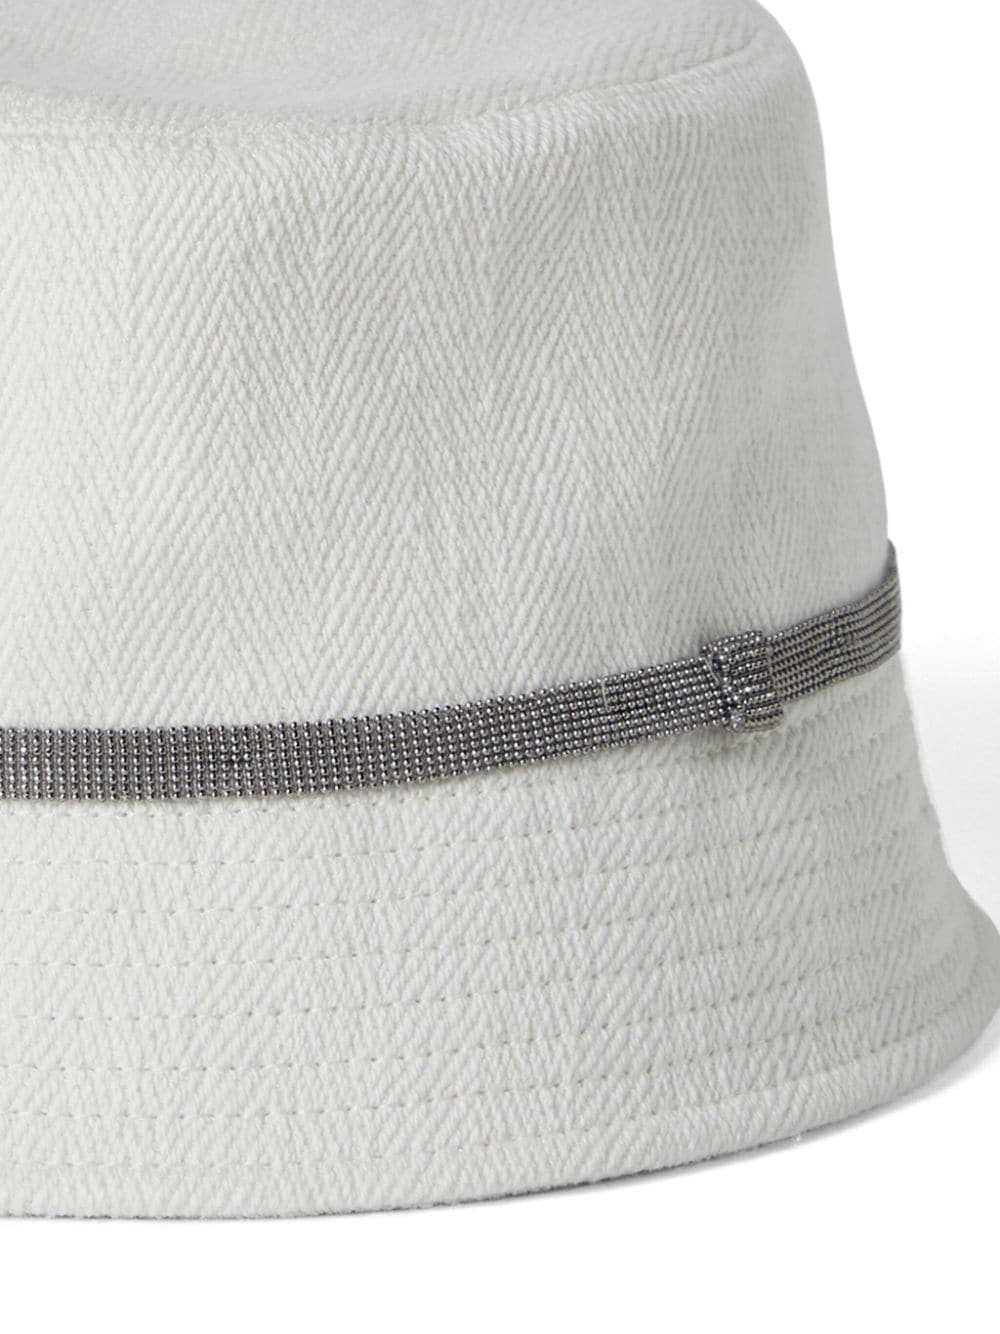 BRUNELLO CUCINELLI White Linen and Cotton Bucket Hat with Shiny Details